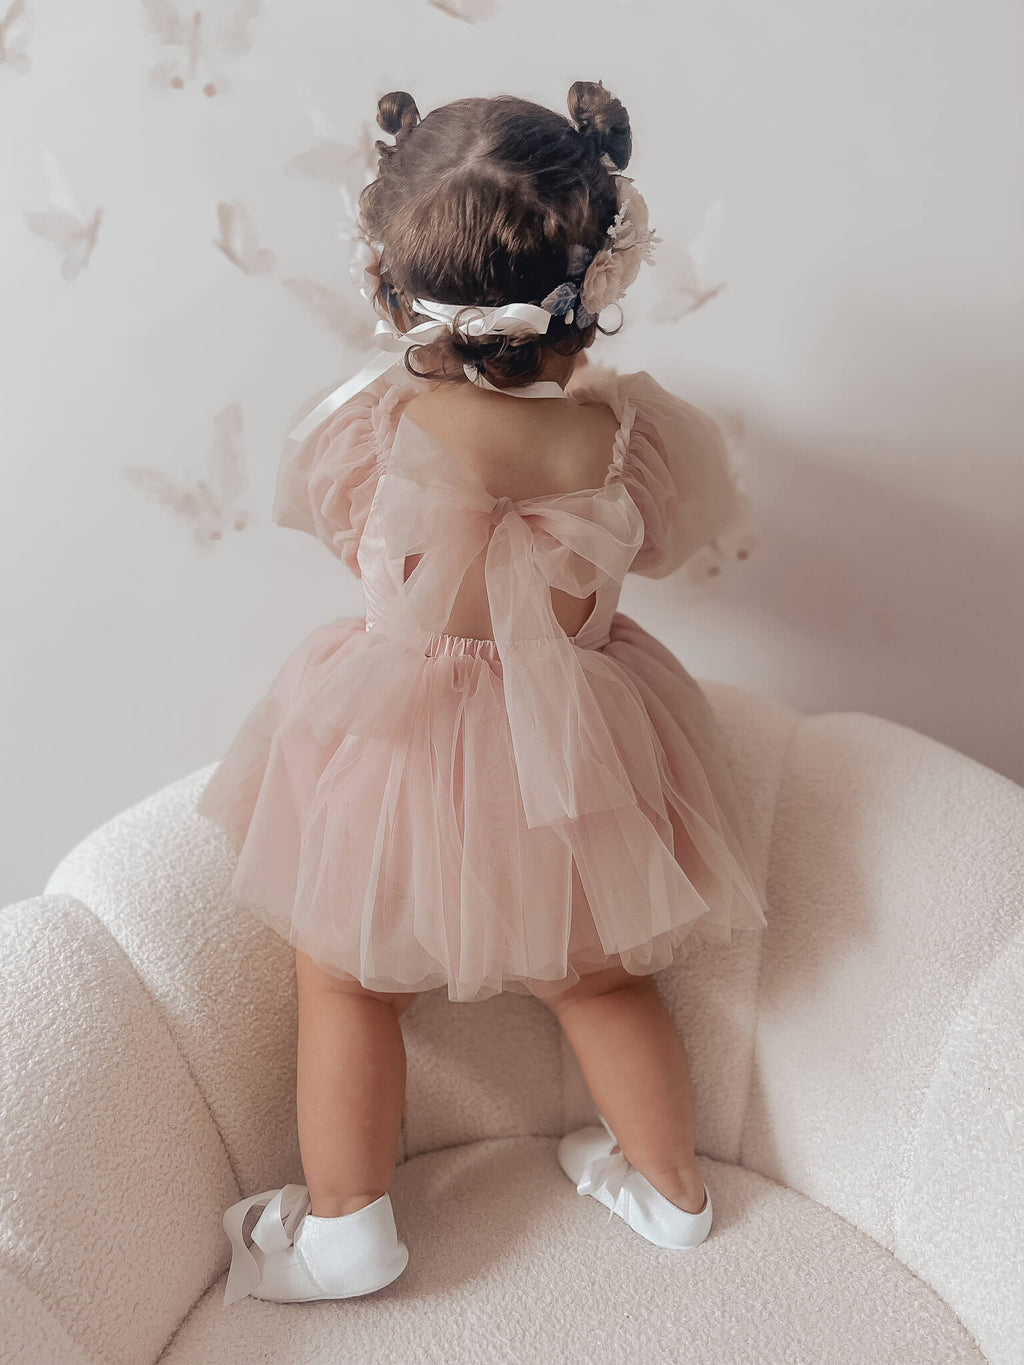 Toddler sits wearing our dusty pink baby flower girl romper, Wren romper, with her hands at her chin showing the billowing soft tulle sleeves. She also wears our Rose flower crown in blush. 